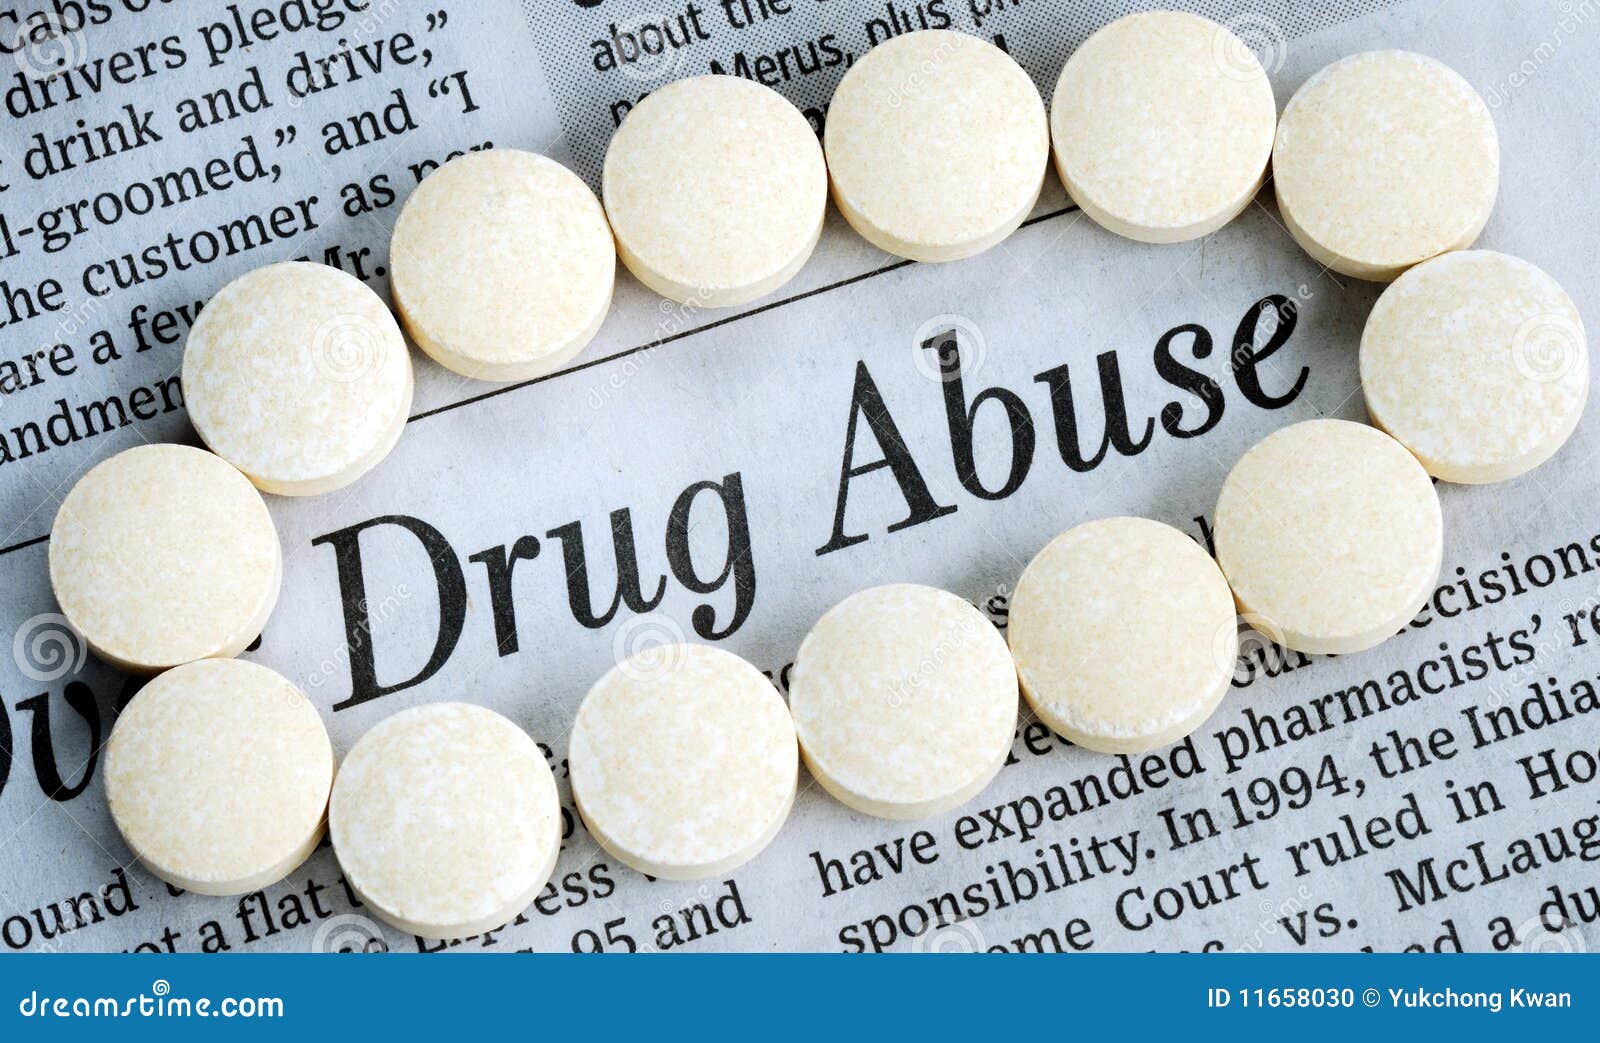 drug abuse is a nationwise social problem